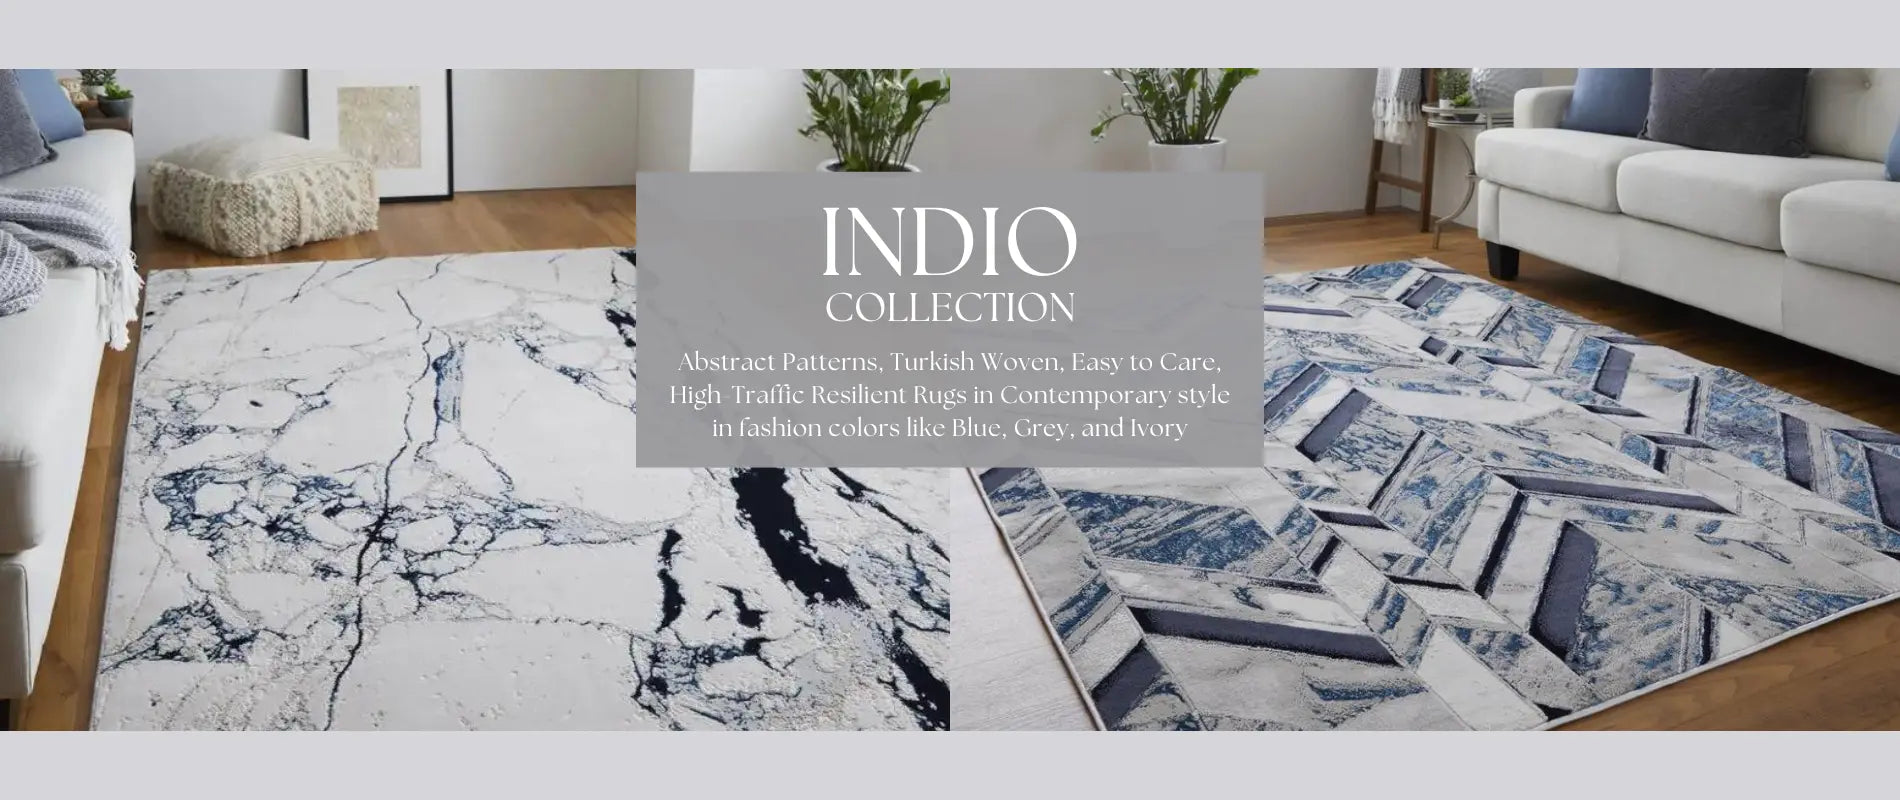 Feizy Indio collection contemporary style rugs, perfect for high traffic areas